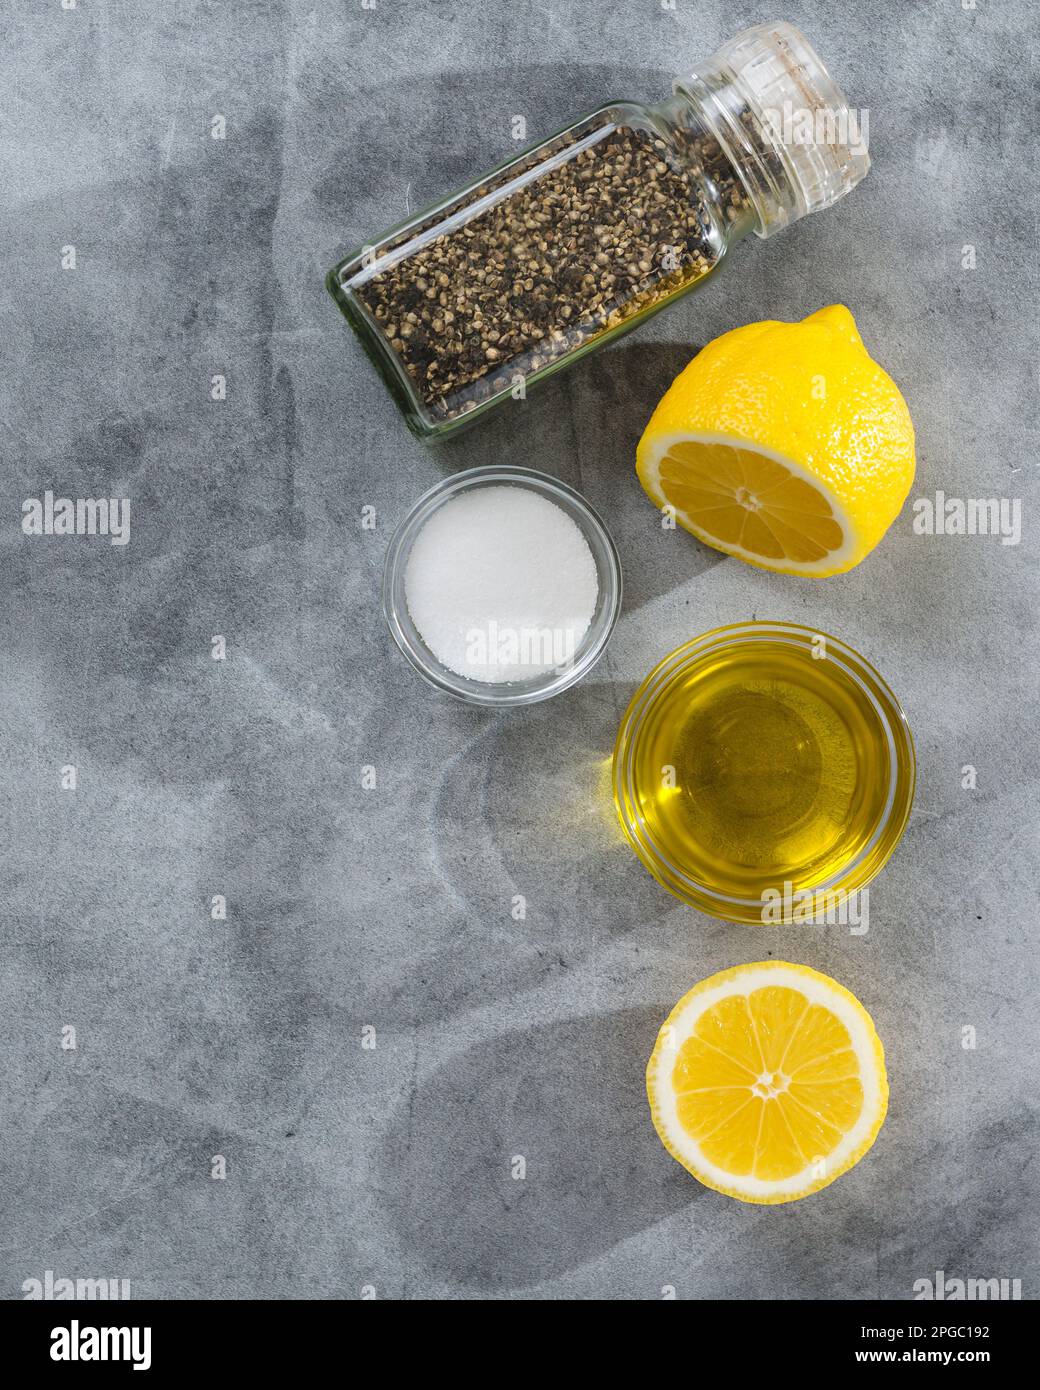 https://c8.alamy.com/comp/2PGC192/salt-black-pepper-olive-oil-and-lemon-close-up-view-from-above-copy-space-2PGC192.jpg